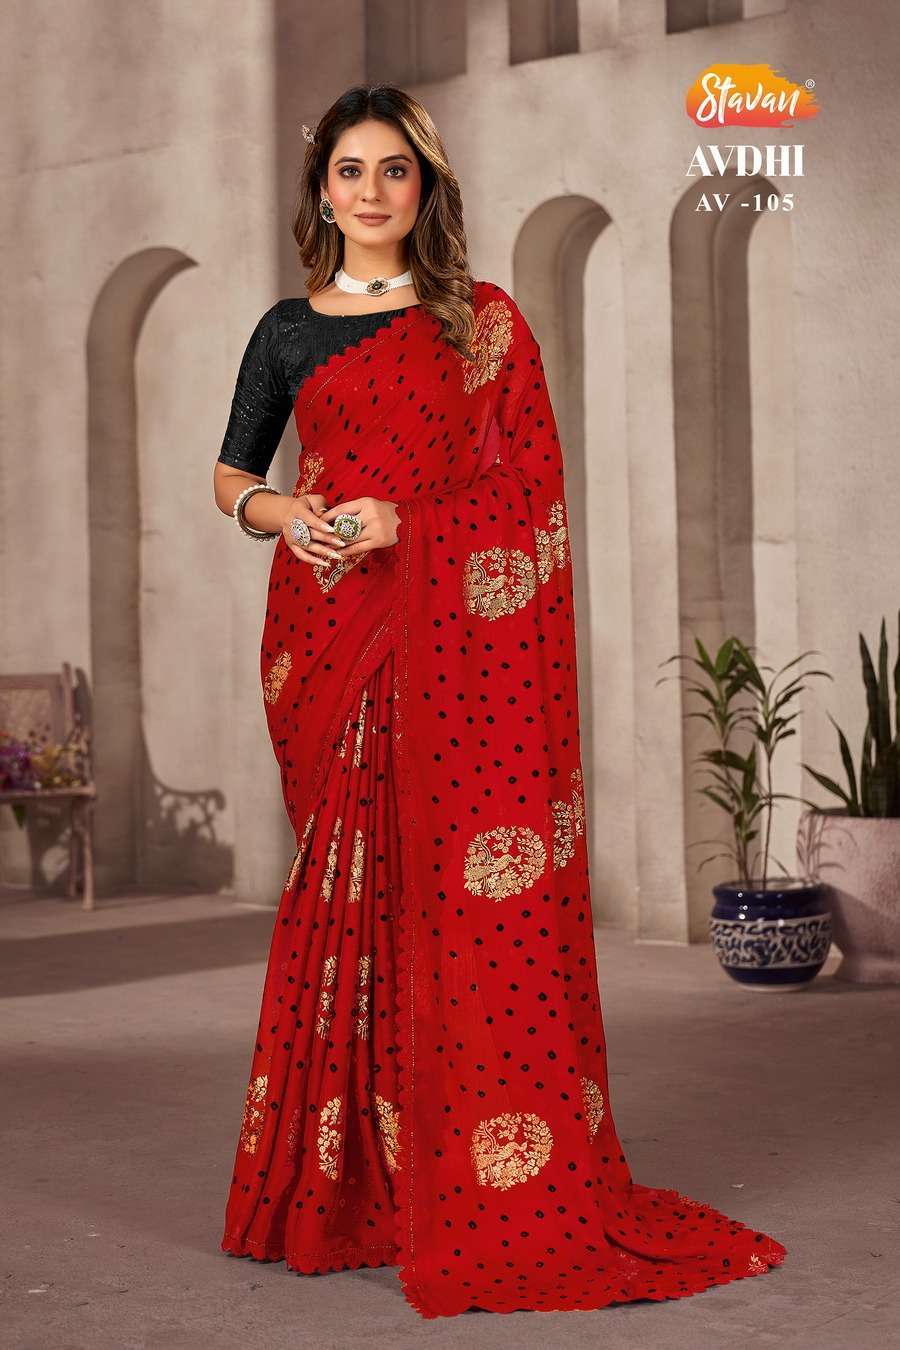 Stavan Avdhi Fancy Festival Special Saree collection at best...